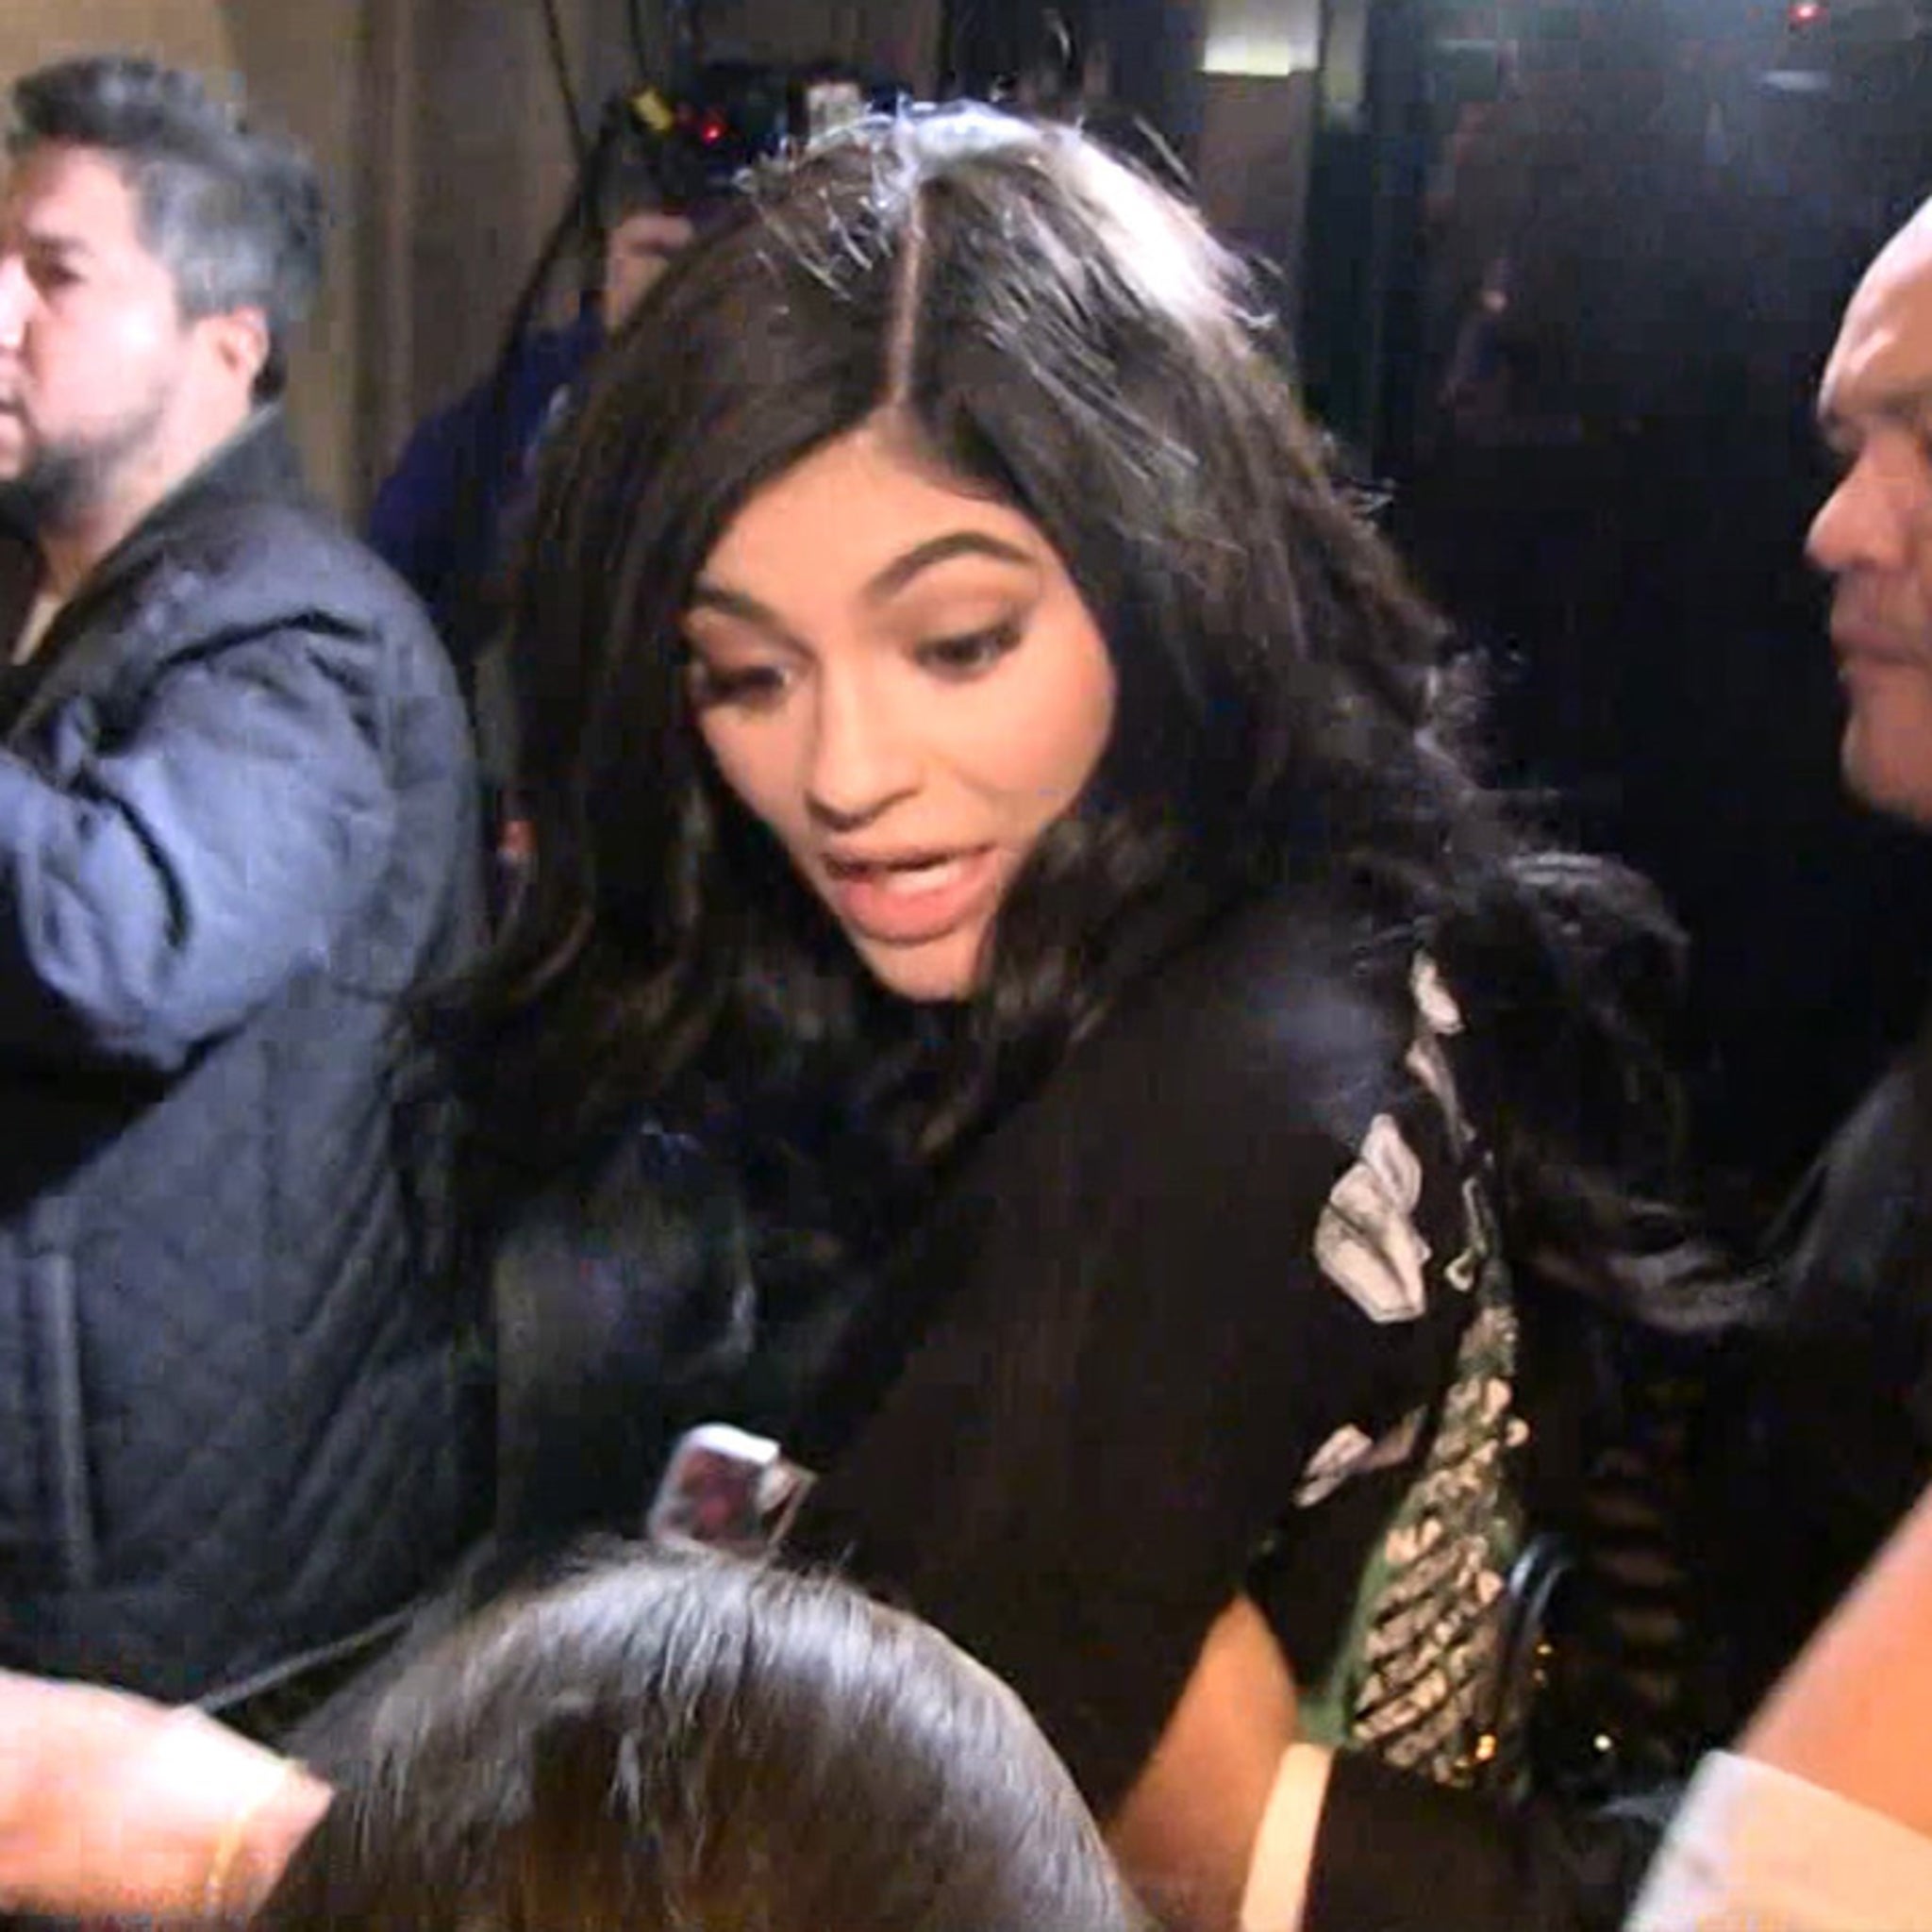 Kylie Jenner Wears Do-Rag at NYFW, Fans Rightfully Angry? 